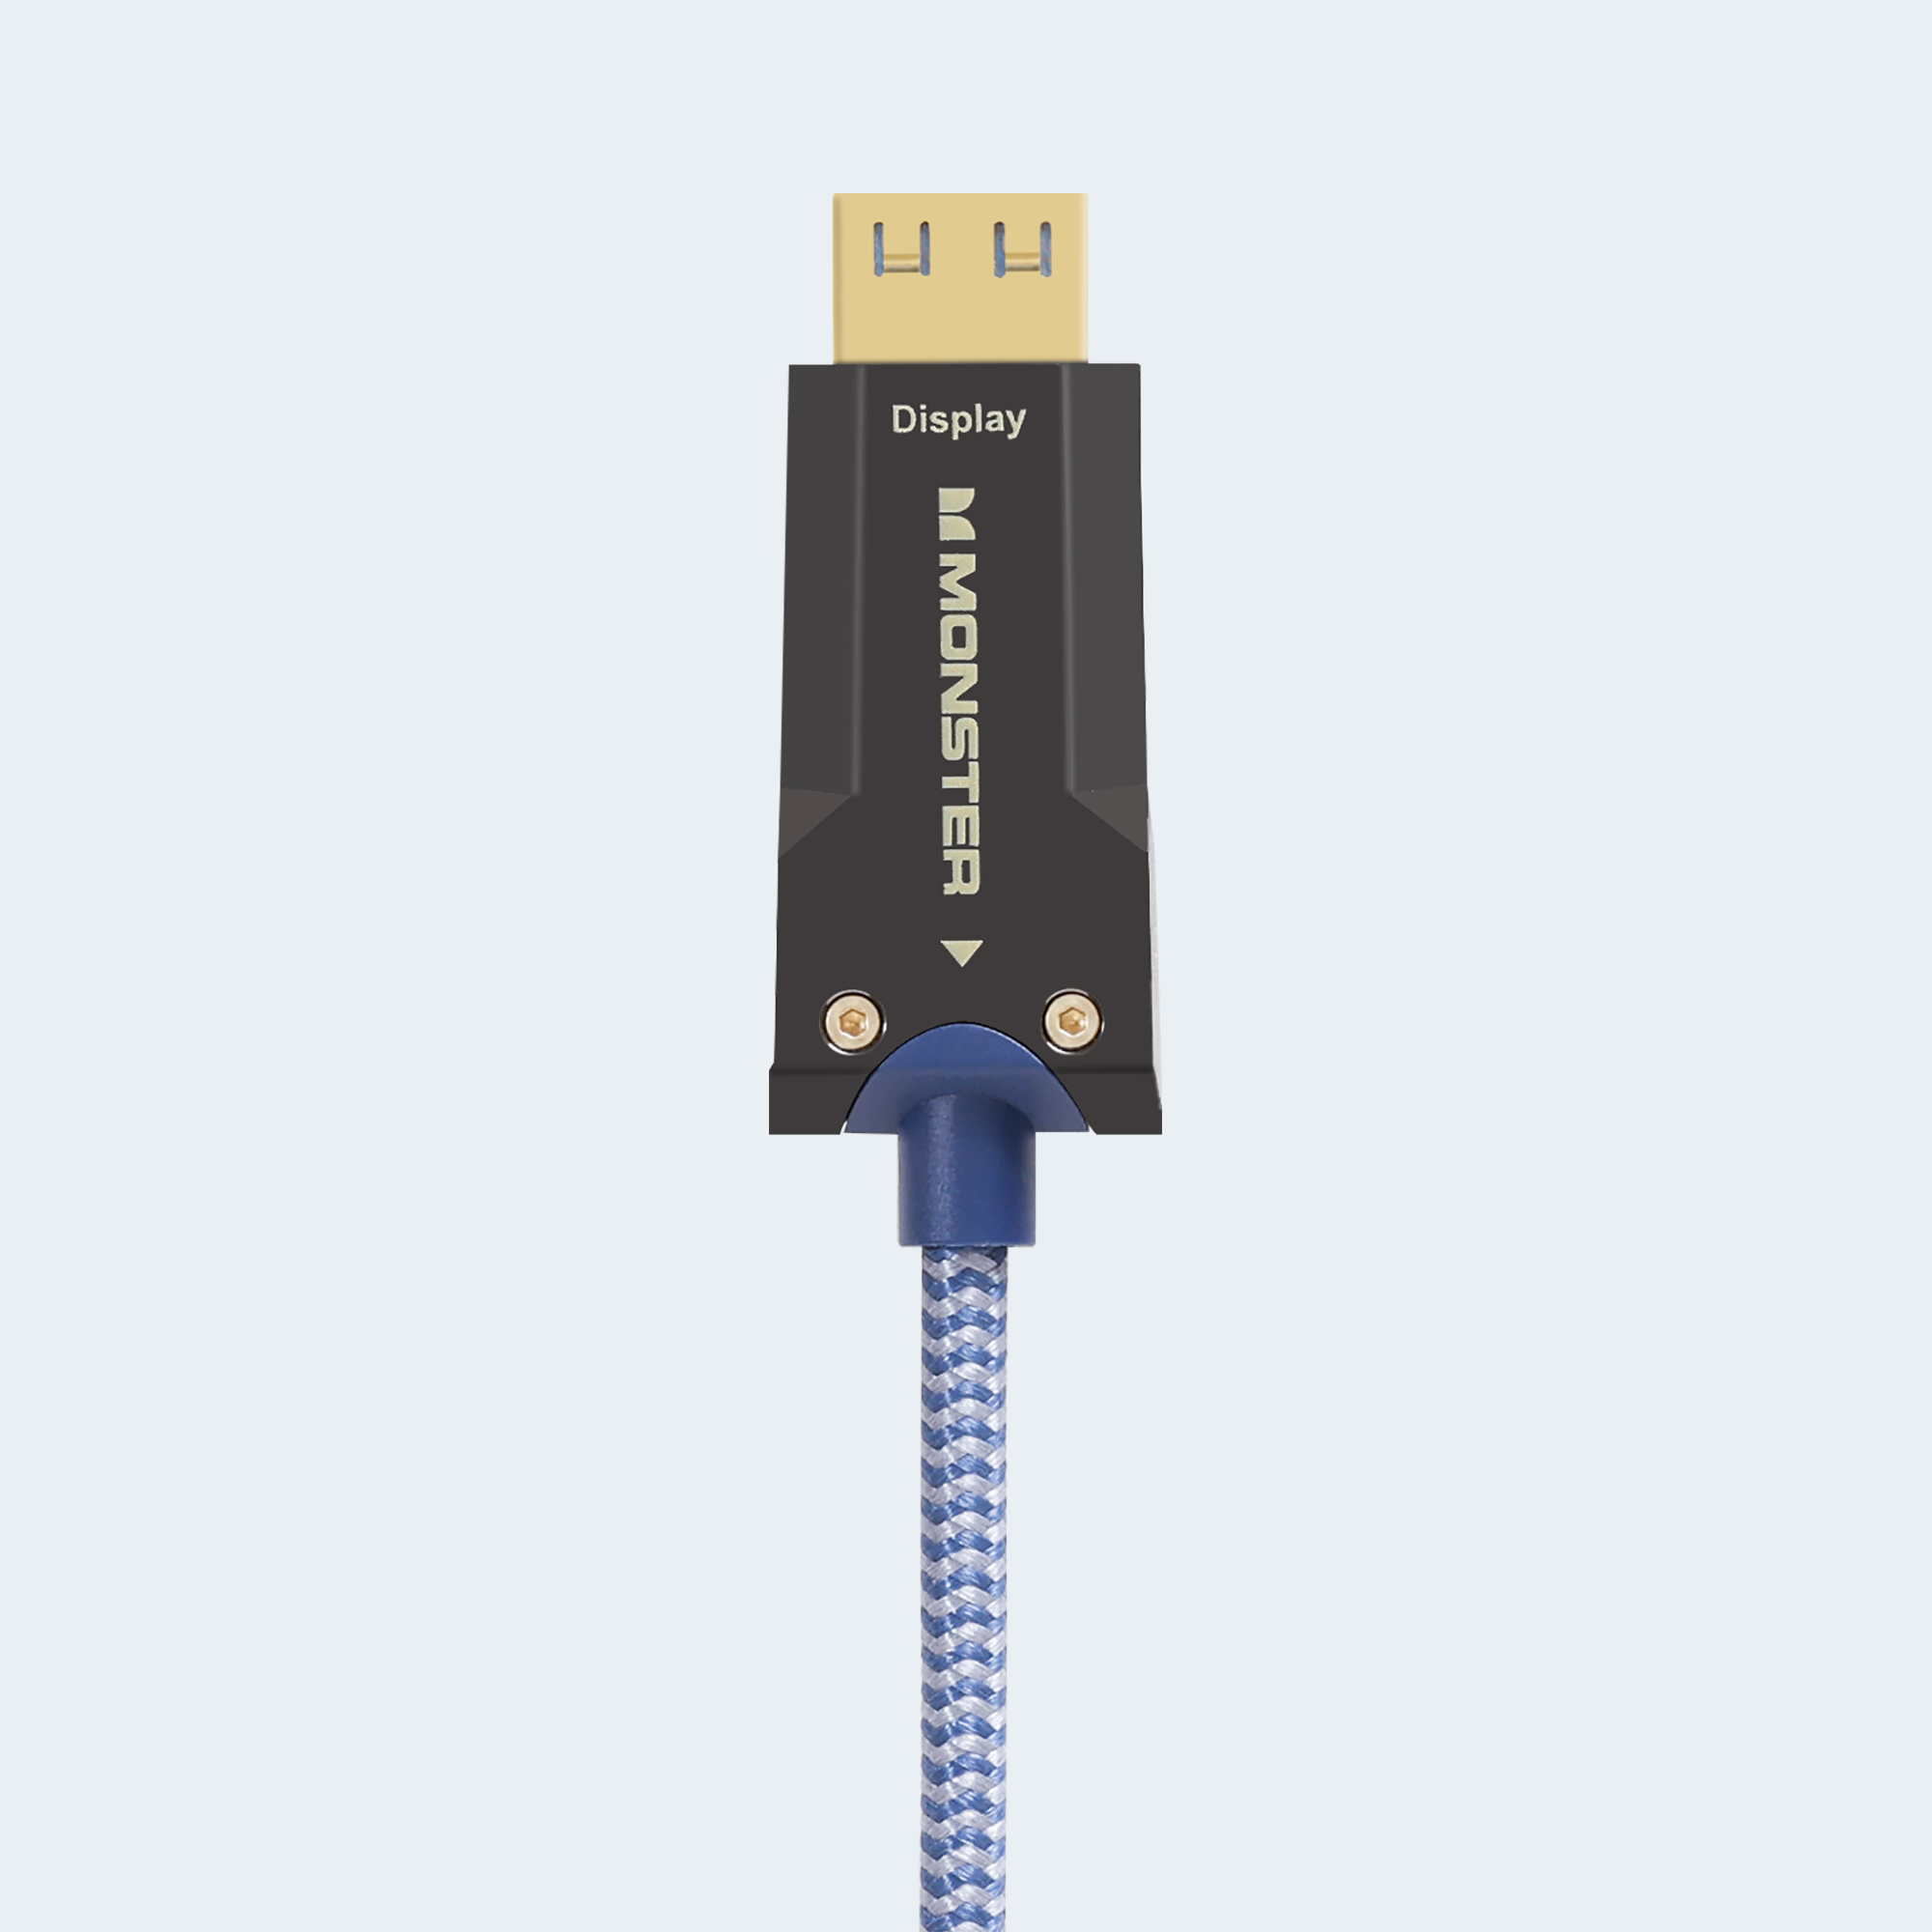 Monster Ultra High Speed Hdmi Cable for sale